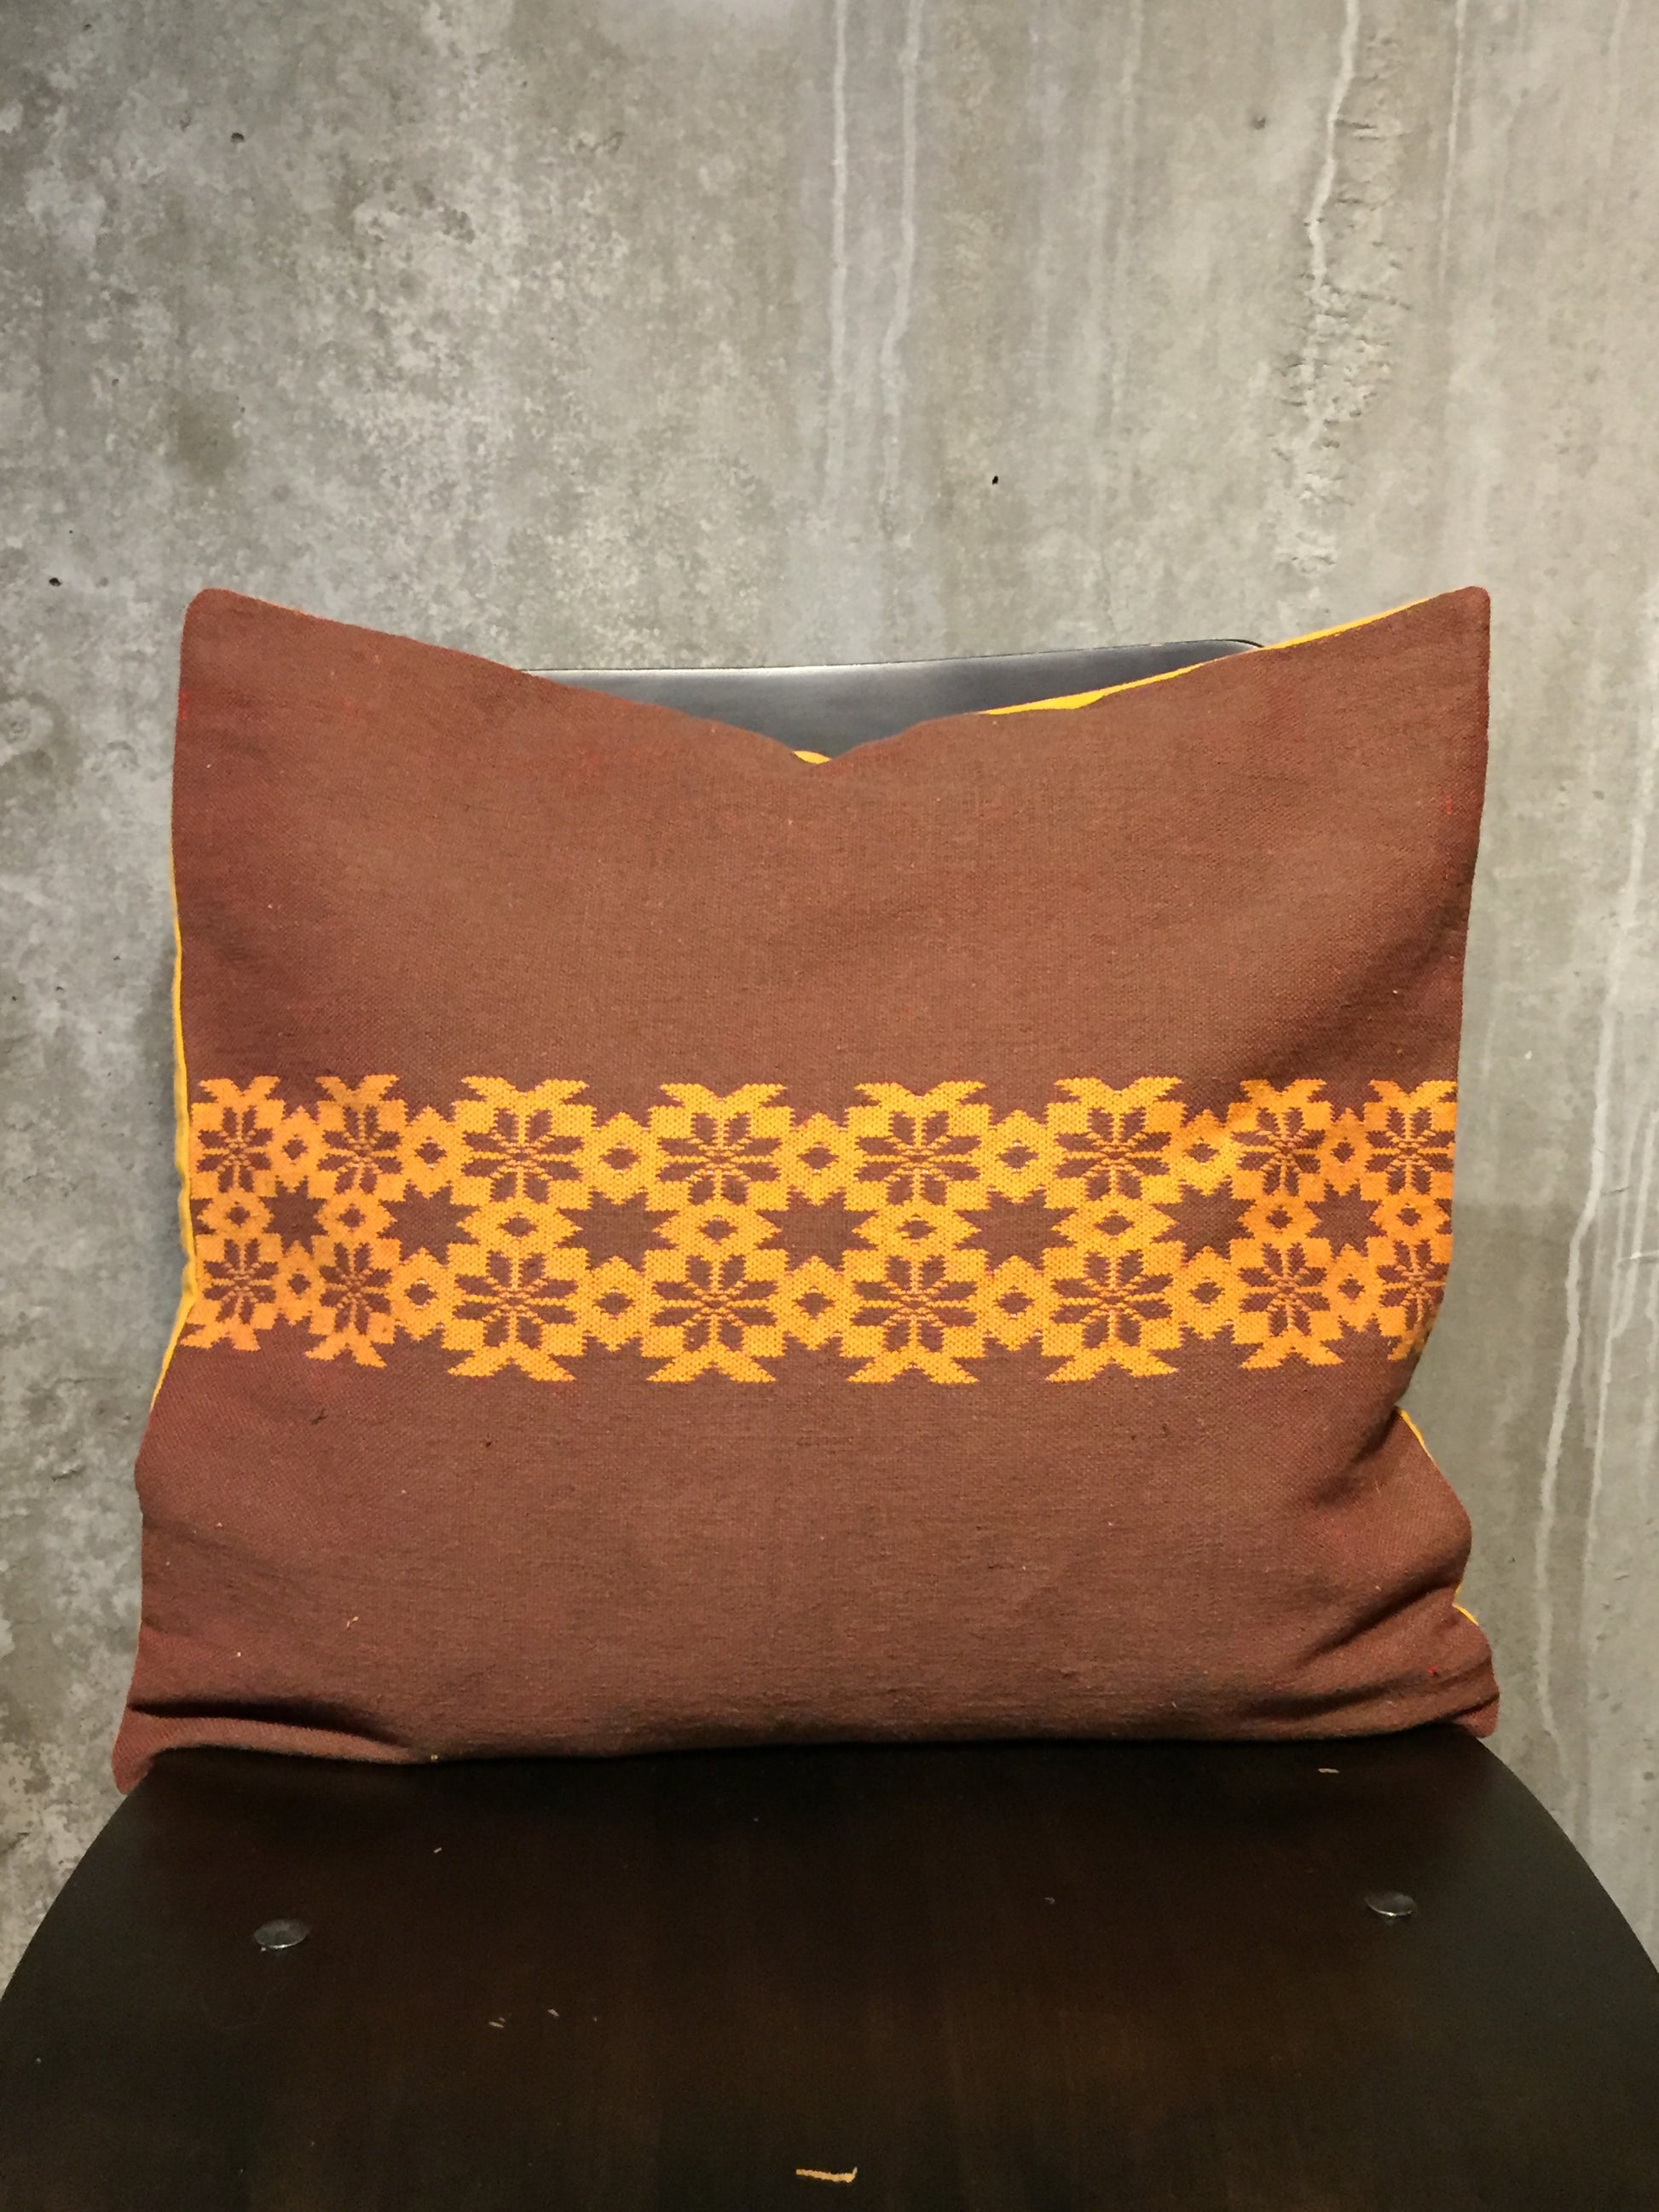 Handwoven Egyptian Cotton Cushion Cover - Flowers & Stars Motif